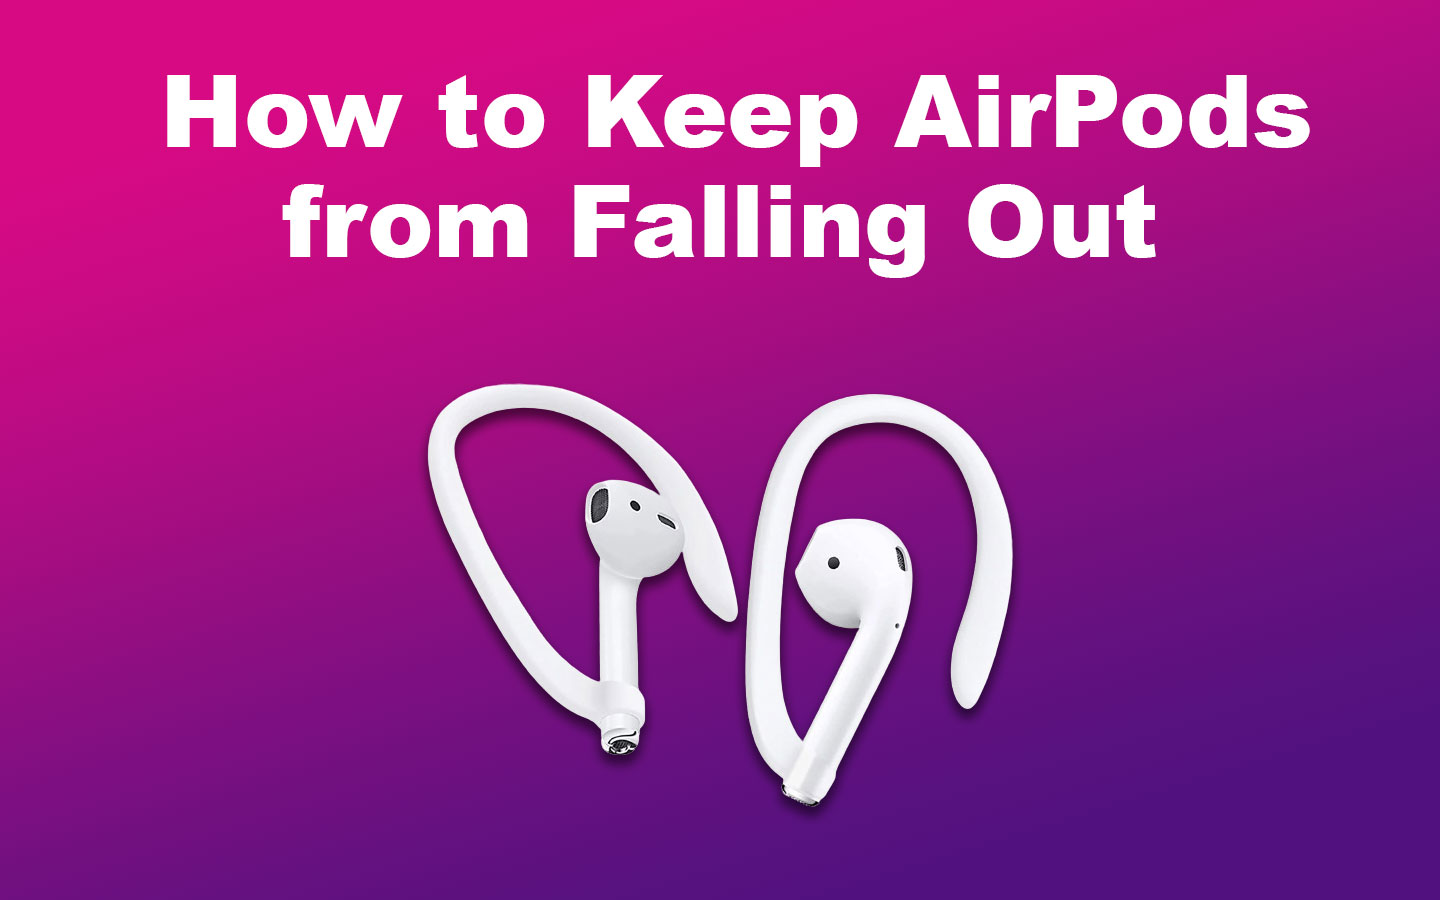 How to Keep AirPods from Falling Out